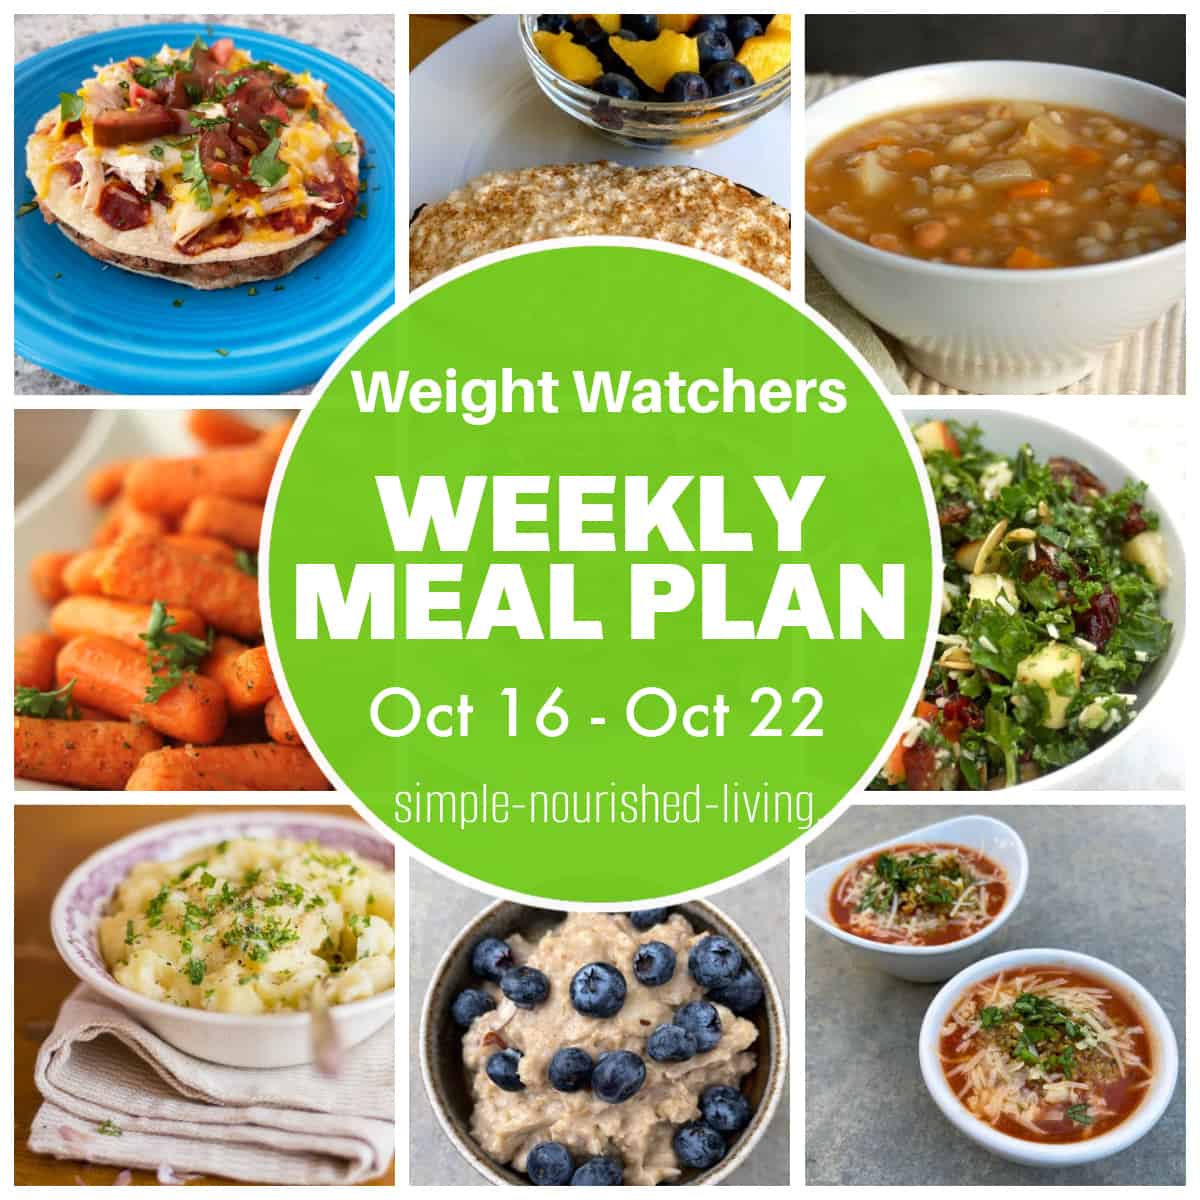 WW Weekly Meal Plan Oct 16